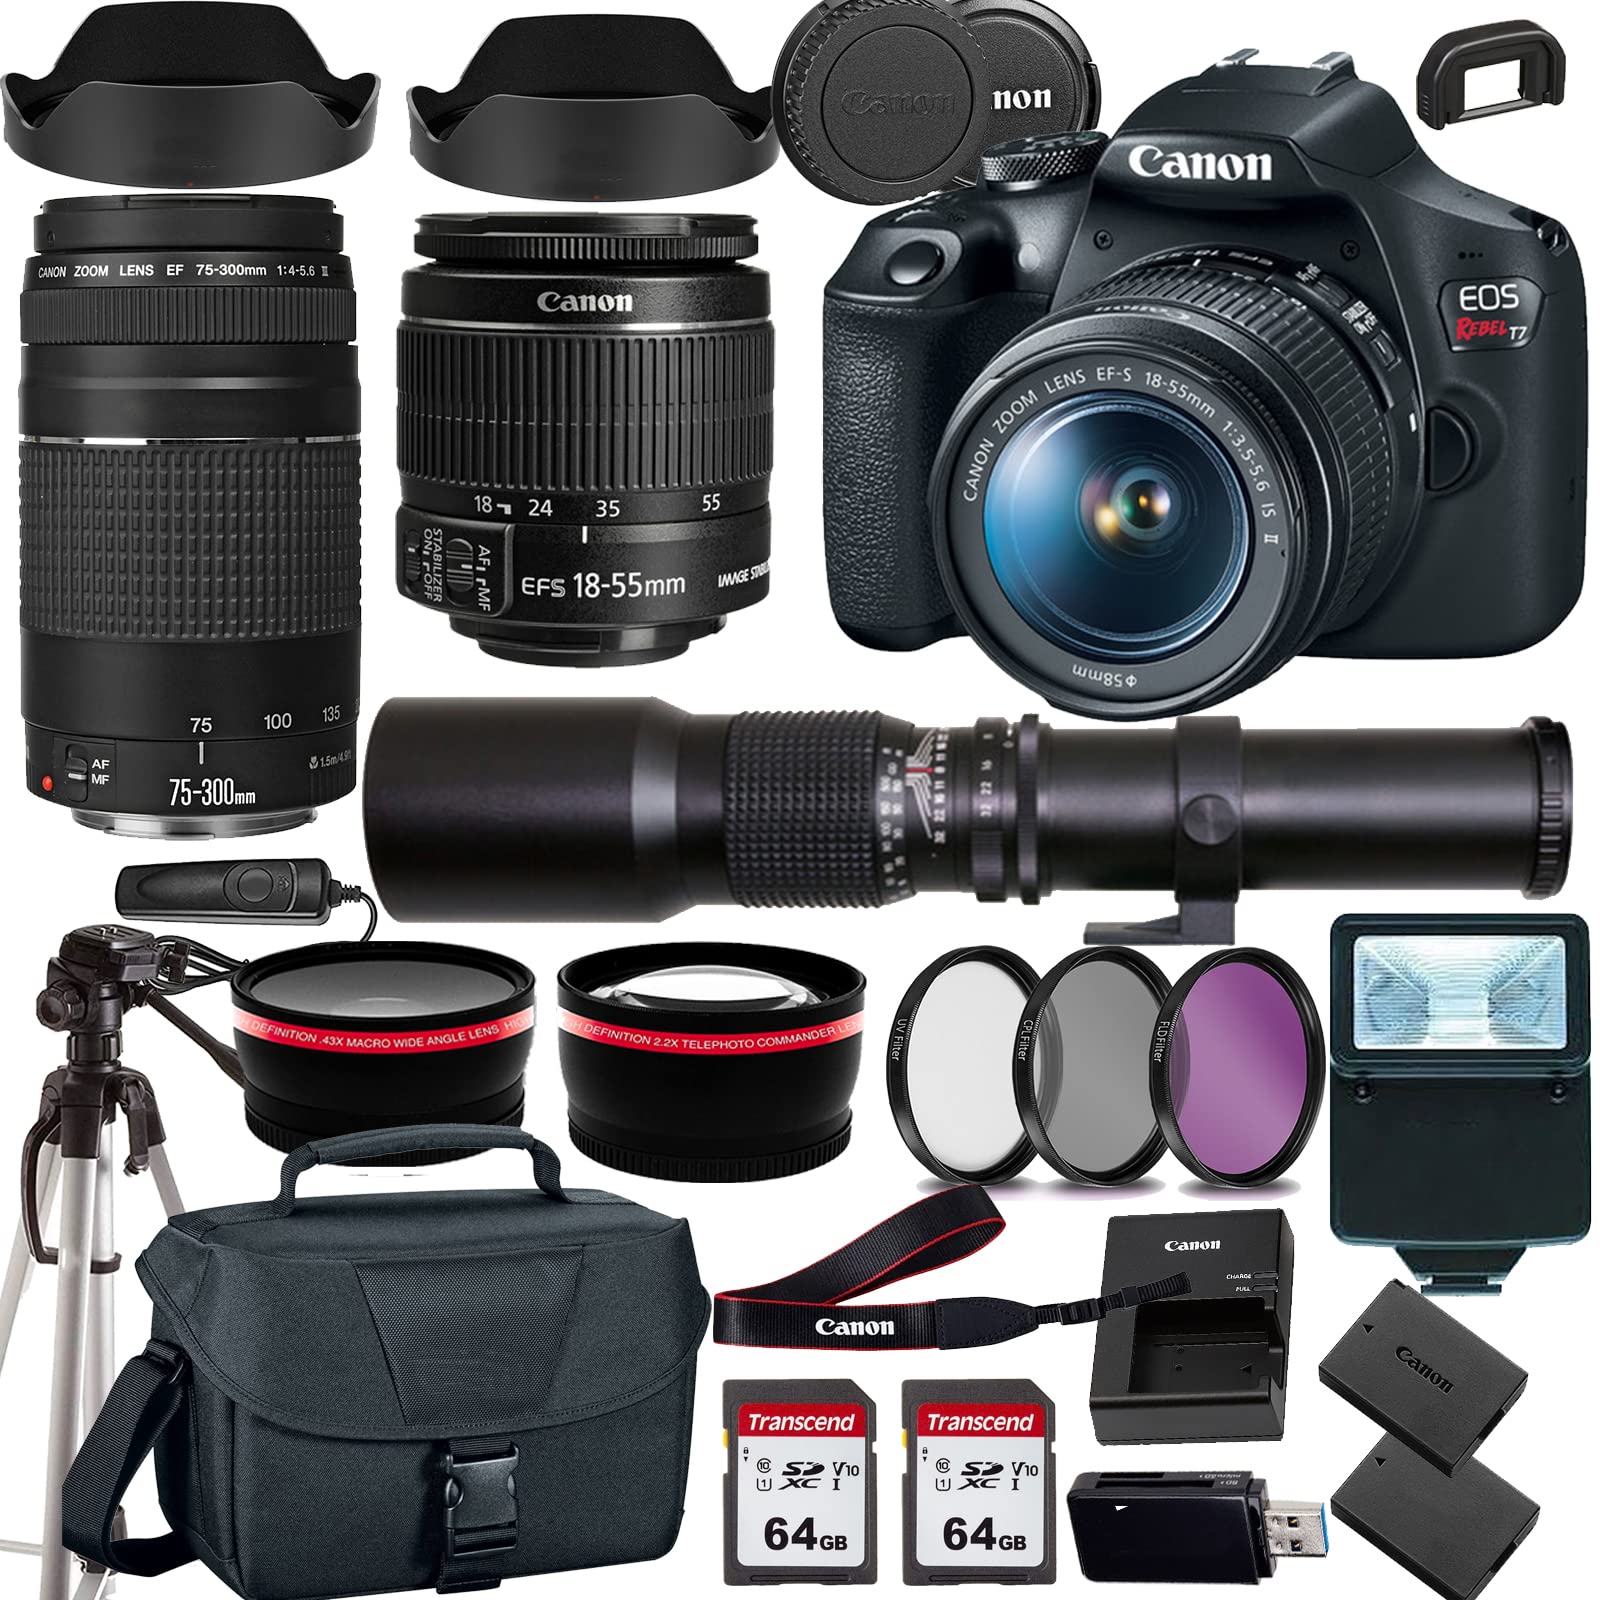 Canon EOS Rebel T7 DSLR Camera with 18-55mm+Canon EF 75-300mm III Lens+500mm f/8.0 Telephoto Lens+case+128Memory Cards (24PC)